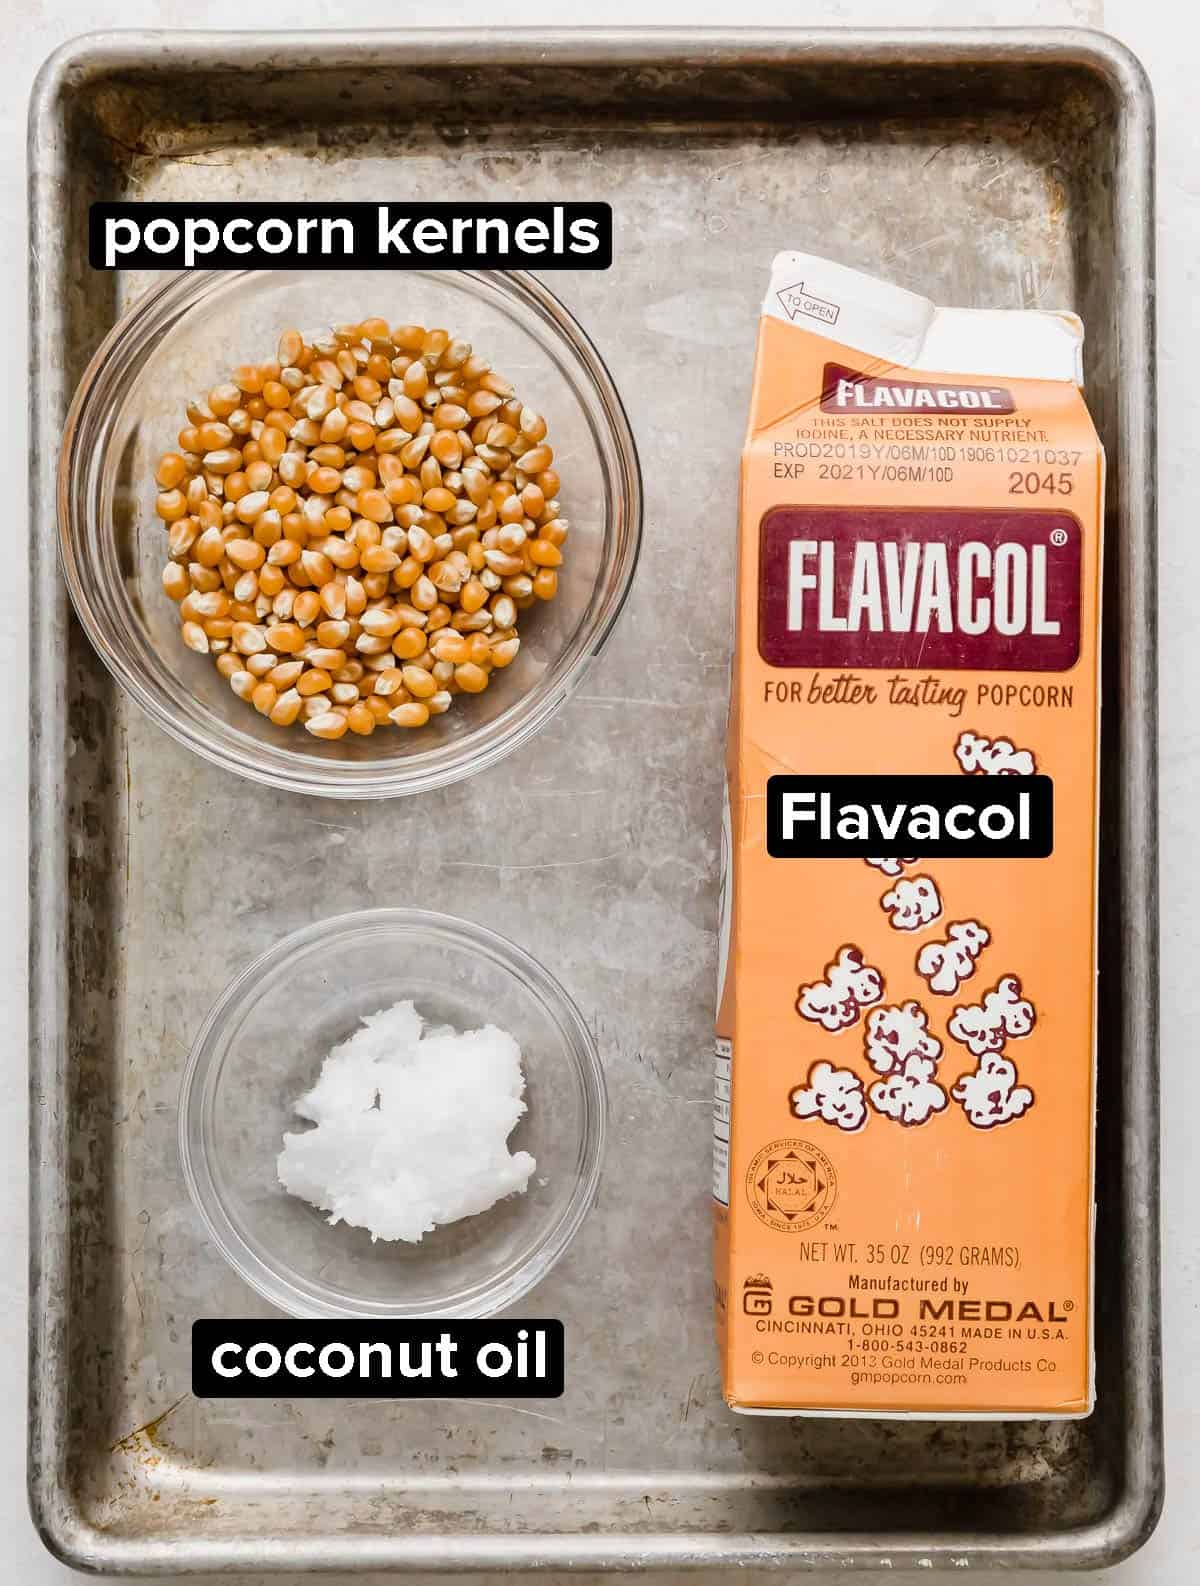 Popcorn kernels, coconut oil, and Flavacol on a gray baking sheet.